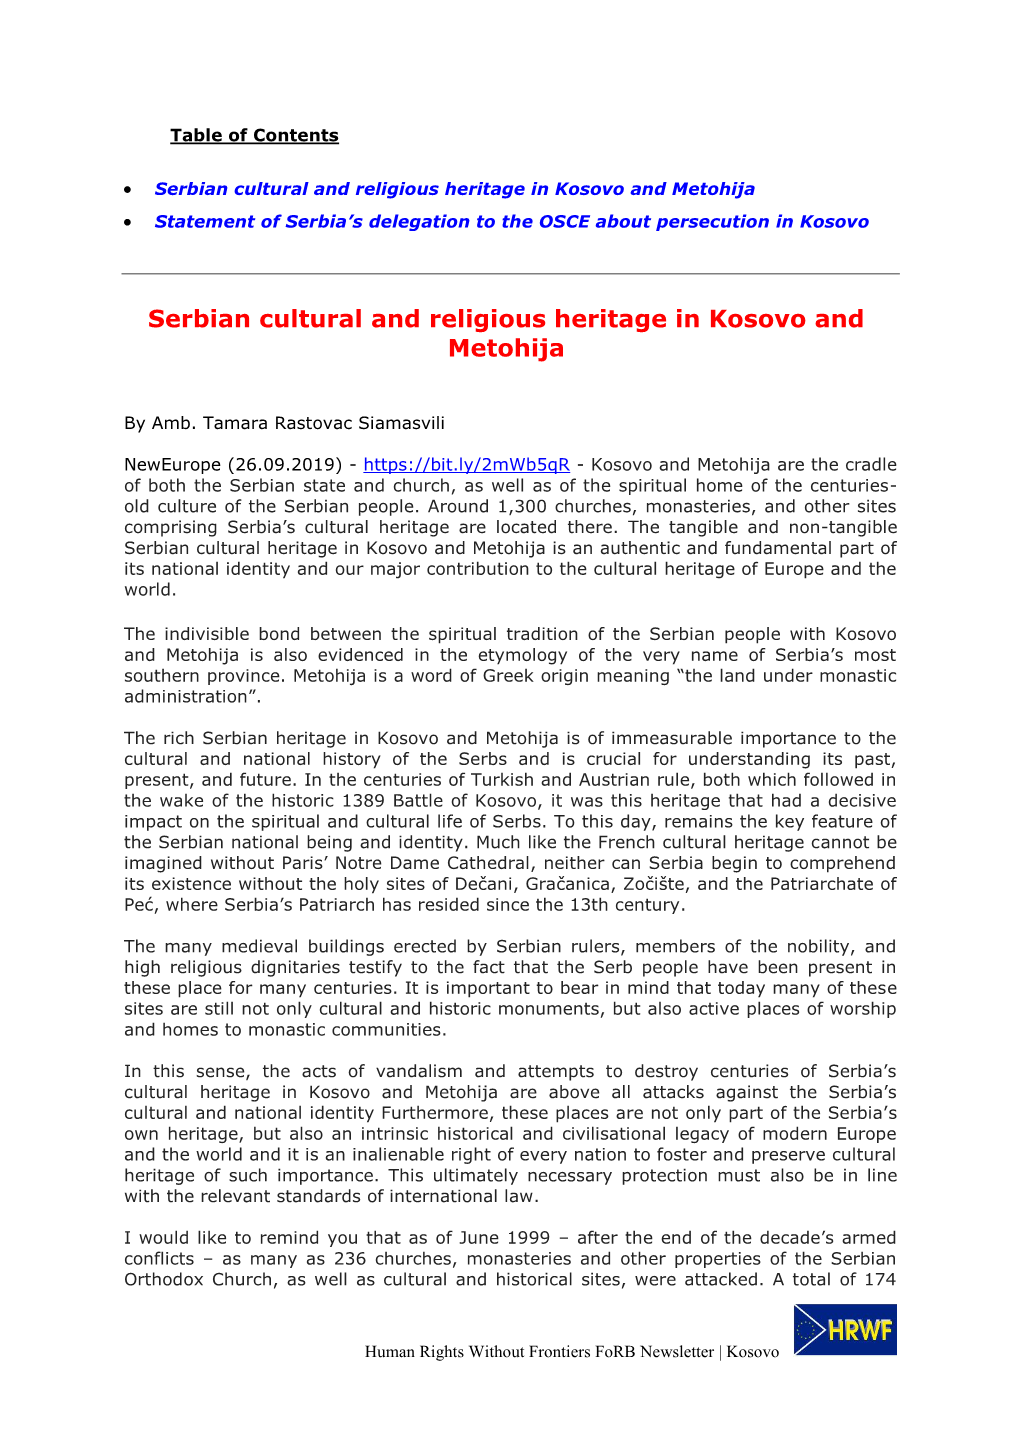 Serbian Cultural and Religious Heritage in Kosovo and Metohija  Statement of Serbia’S Delegation to the OSCE About Persecution in Kosovo